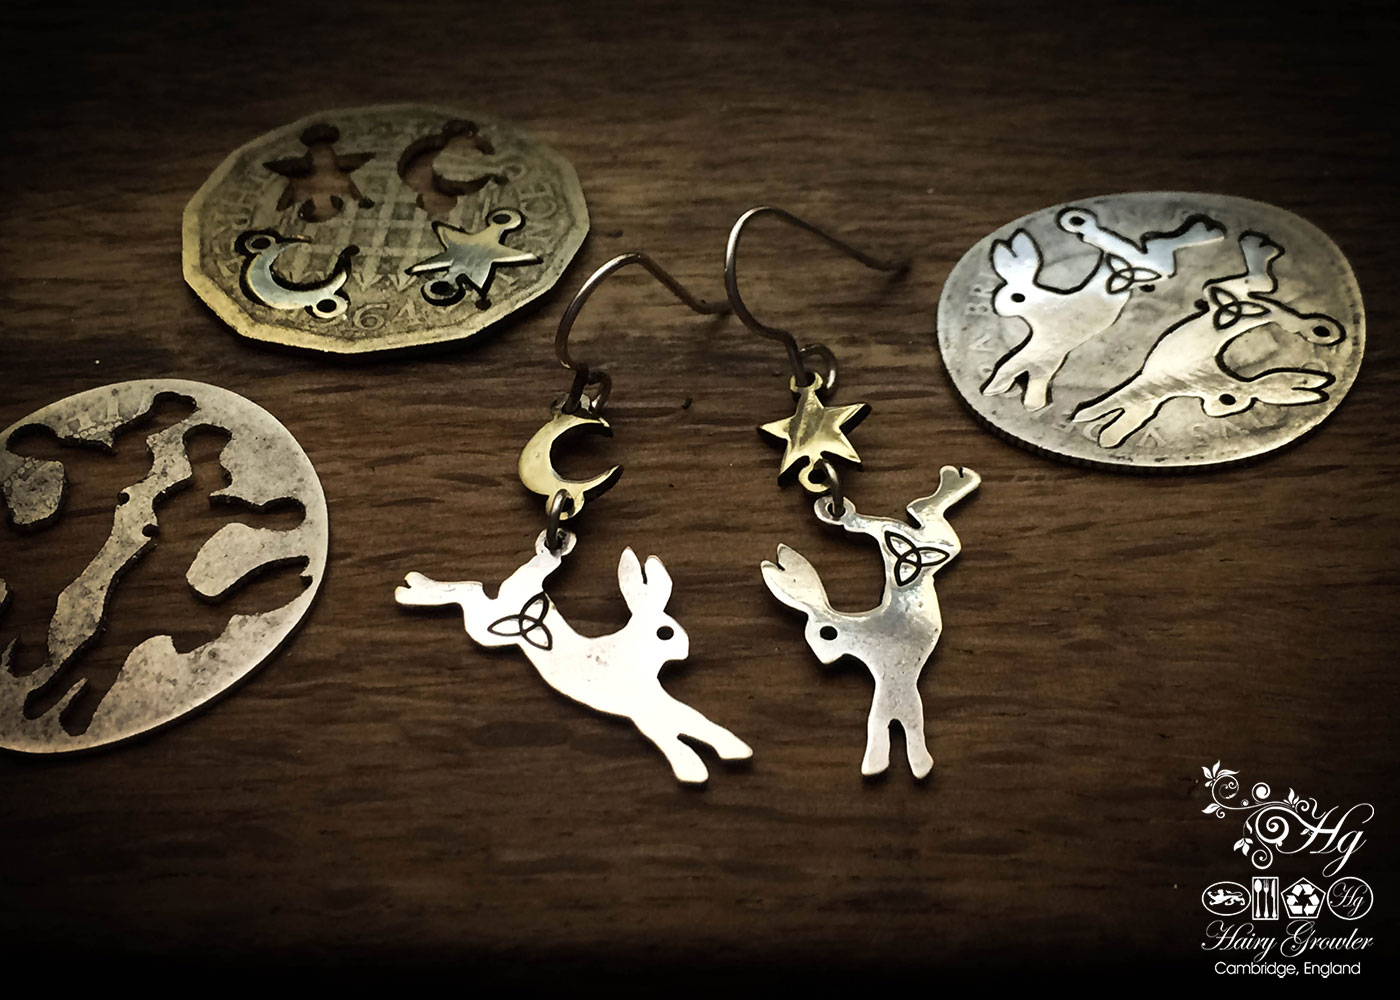 handcrafted and upcycled silver Georgian shilling hare earrings made in Cambridge